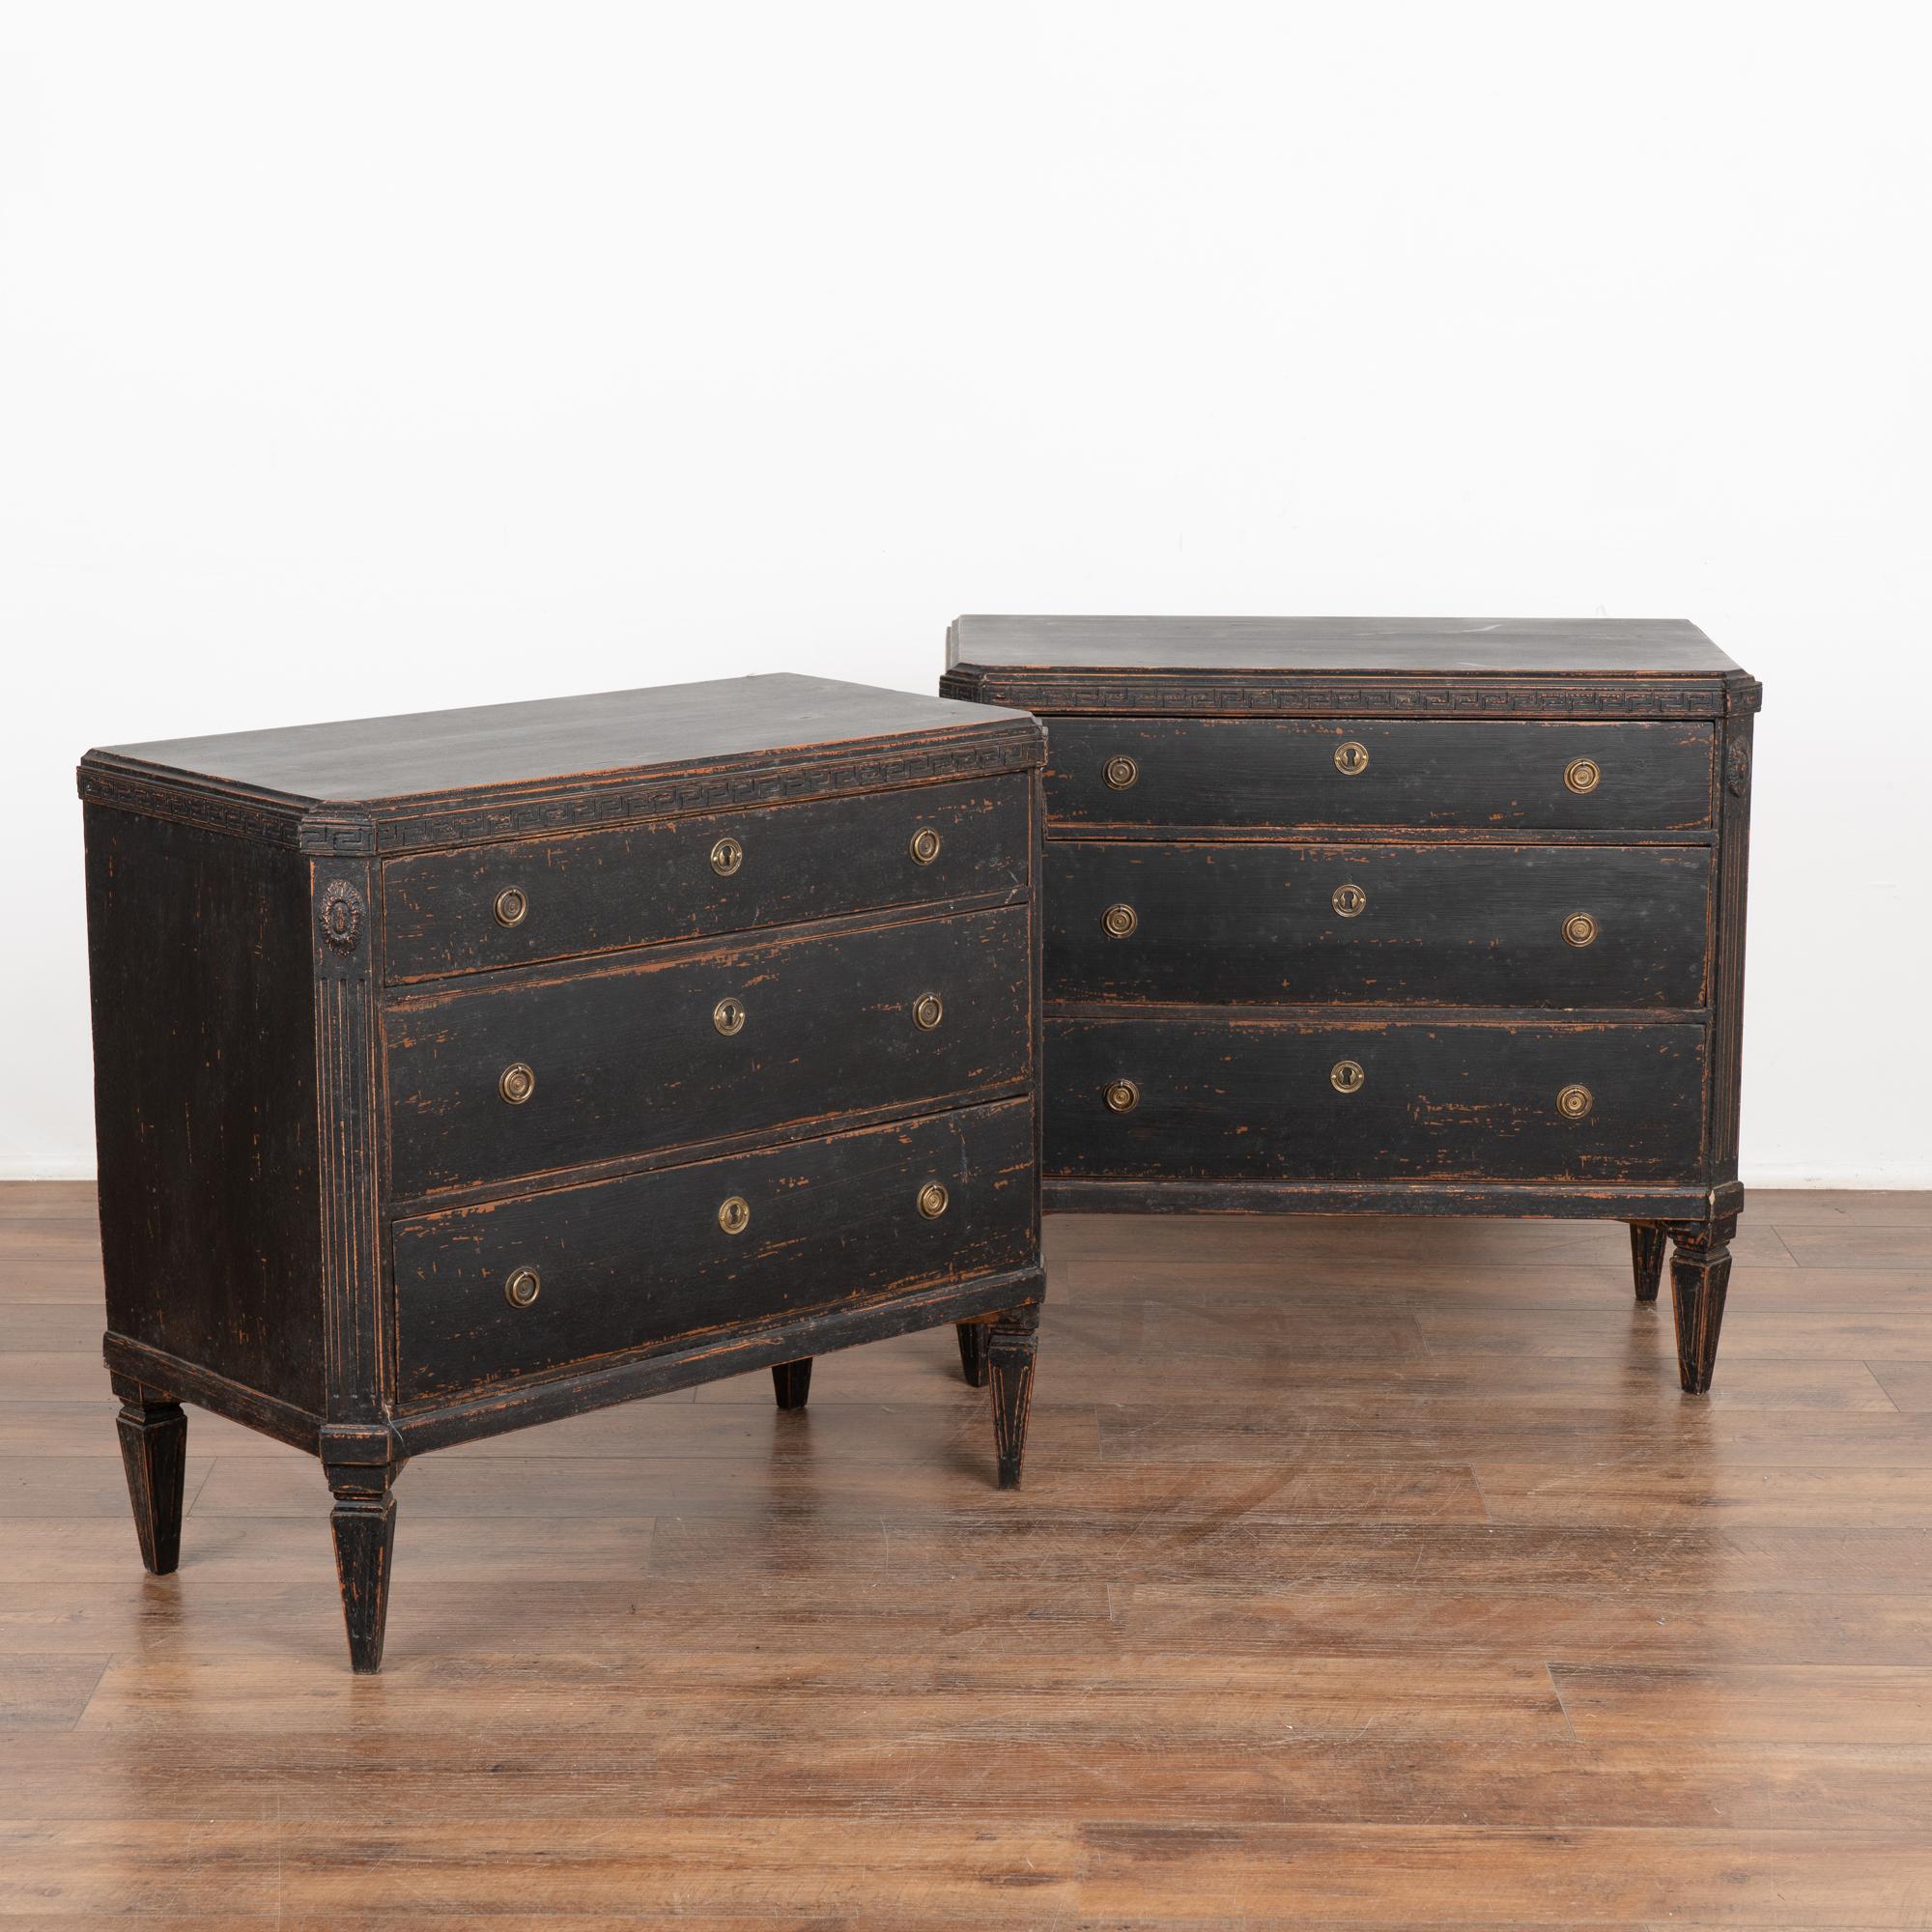 Pair, Gustavian pine chest of drawers with fluted canted sides and tapered feet, additional decorative Greek key or 